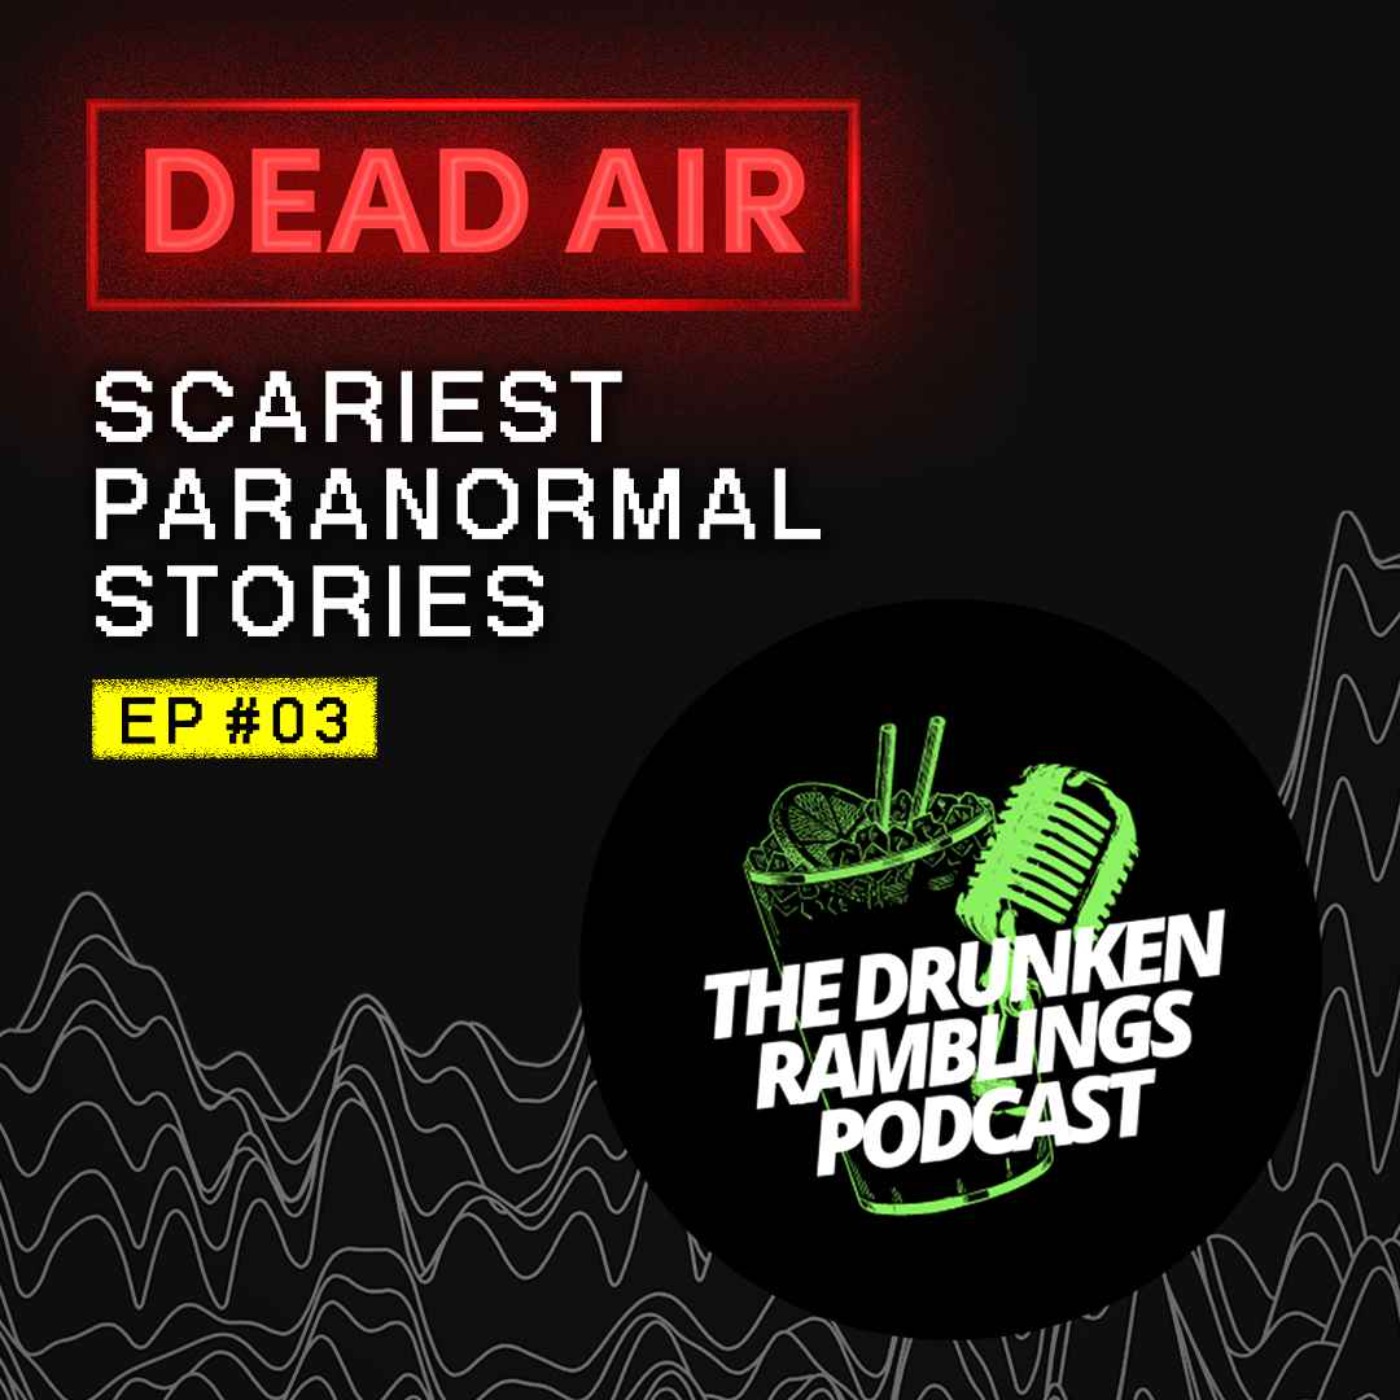 Scariest Paranormal Stories with The Drunken Ramblings Podcast - DEAD AIR